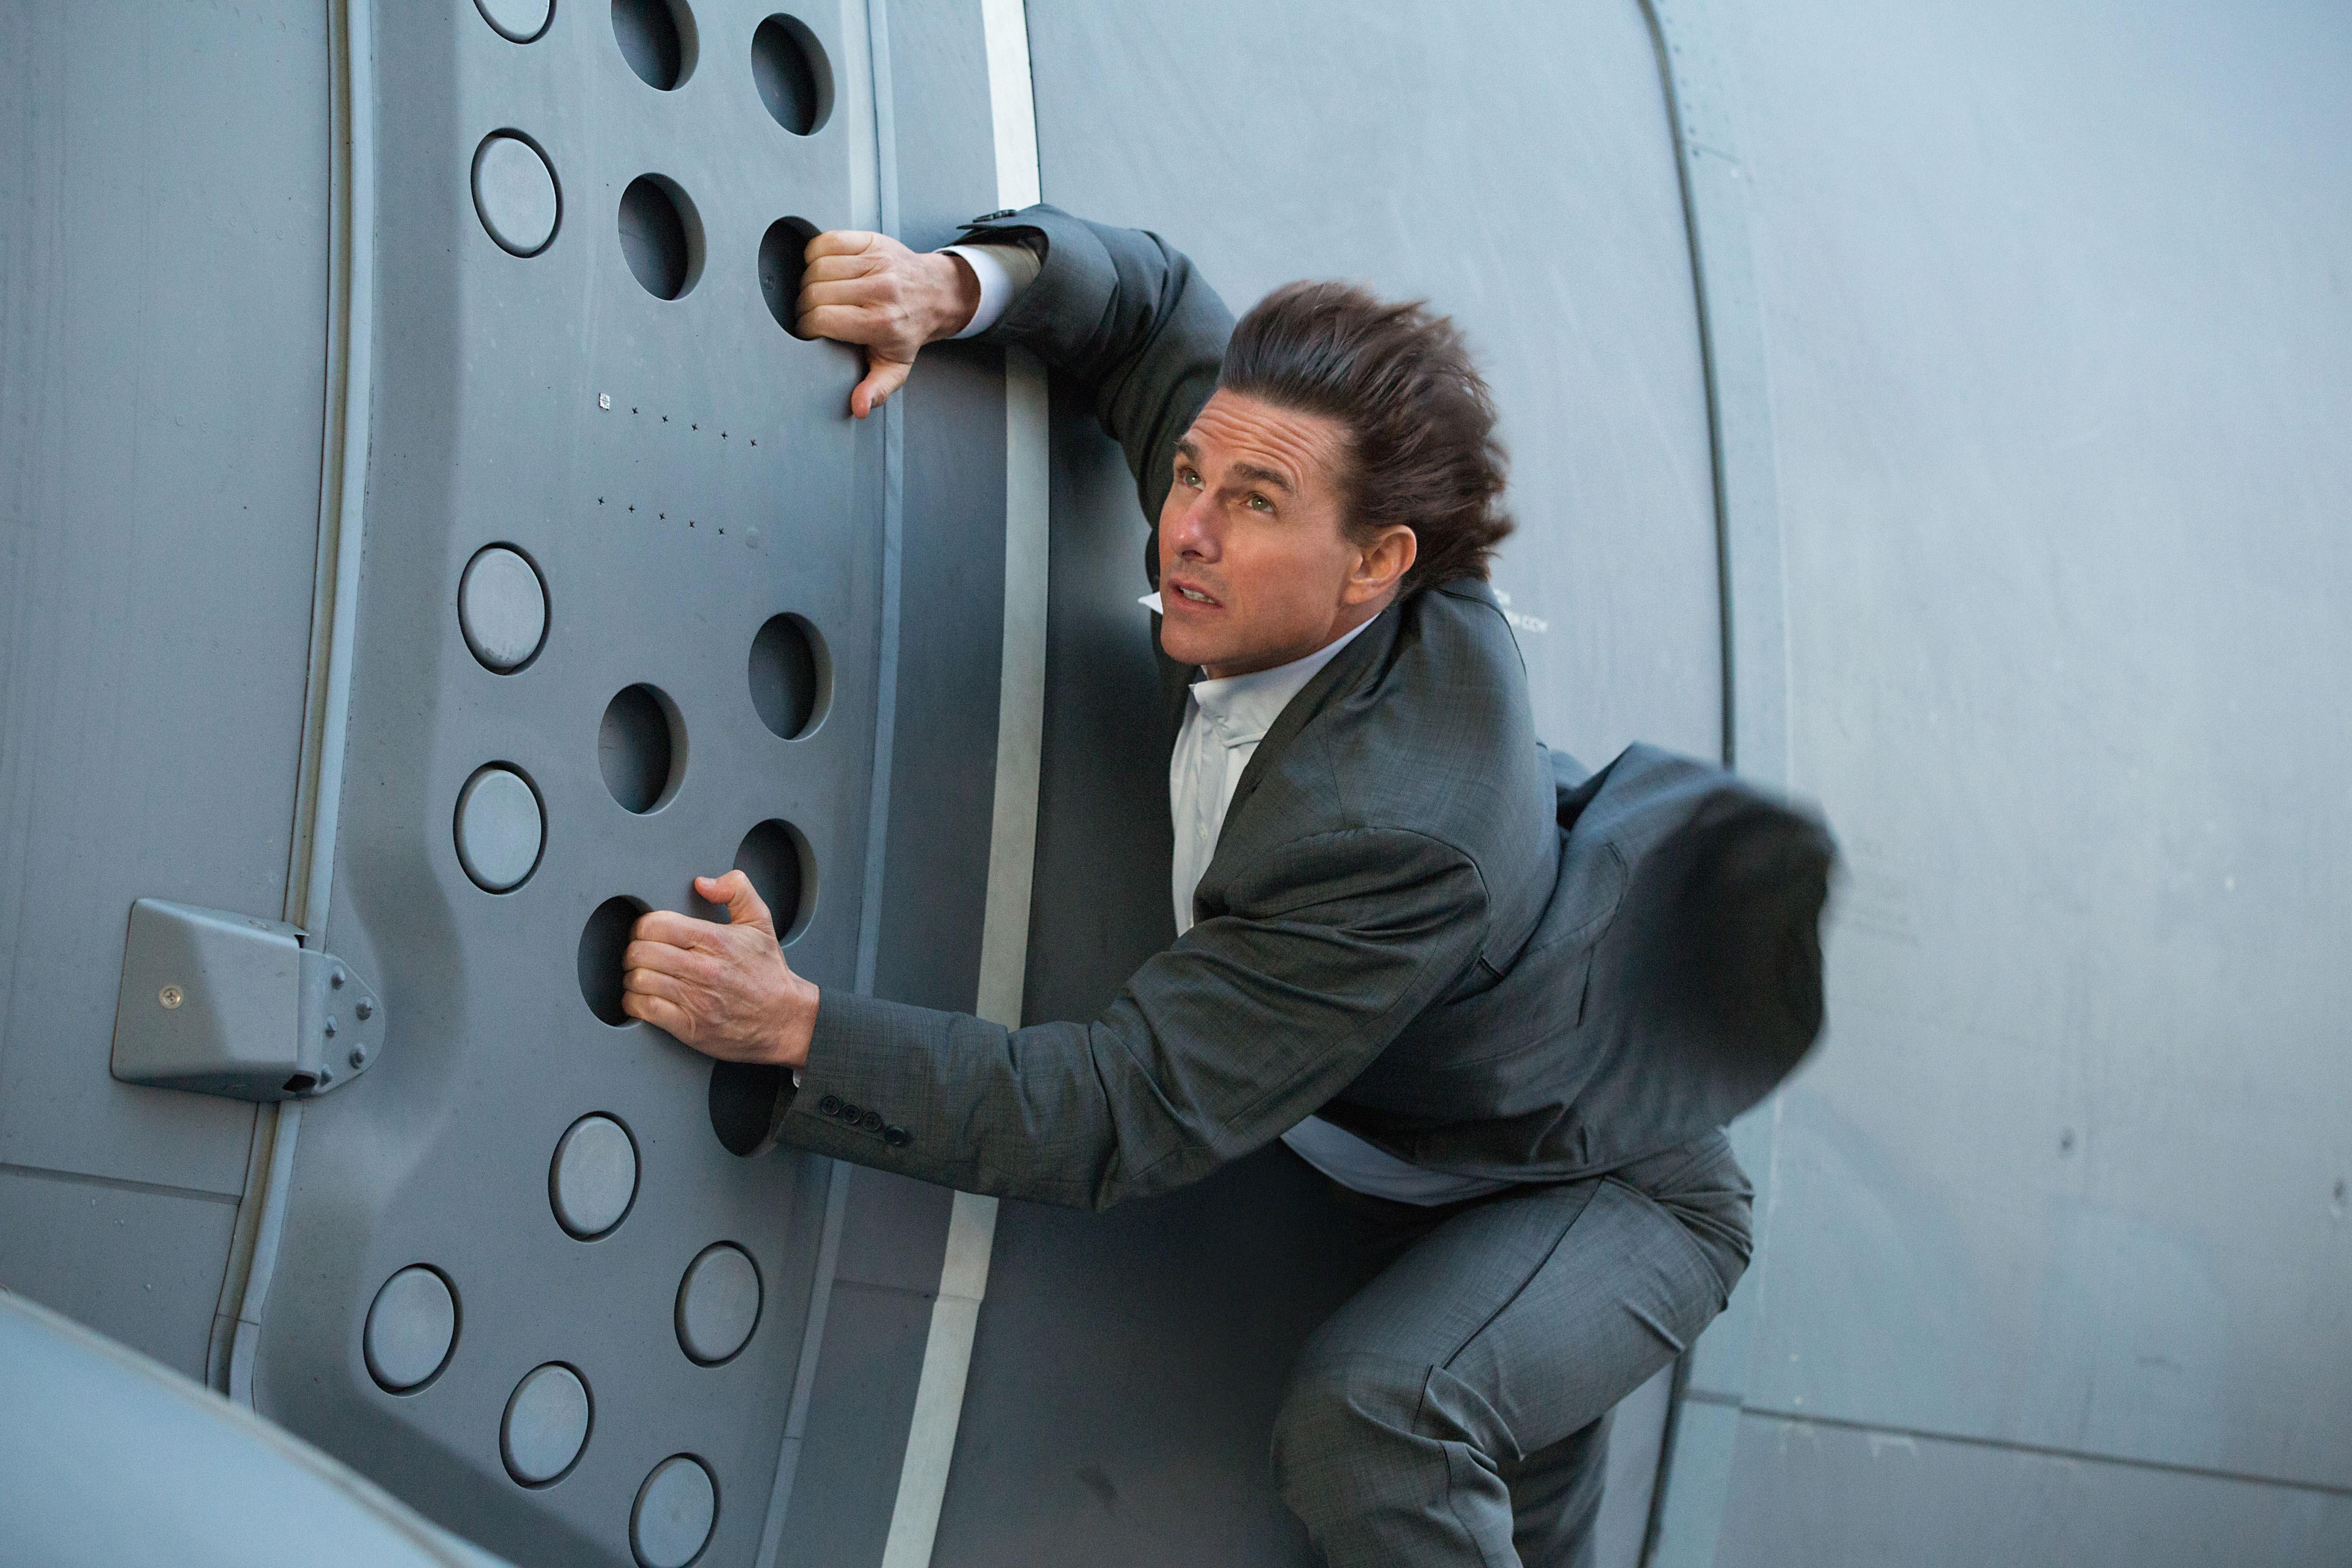 Mission: Impossible Director Hints Tom Cruise Will Be Doing Some Outrageous Stunts For New Film